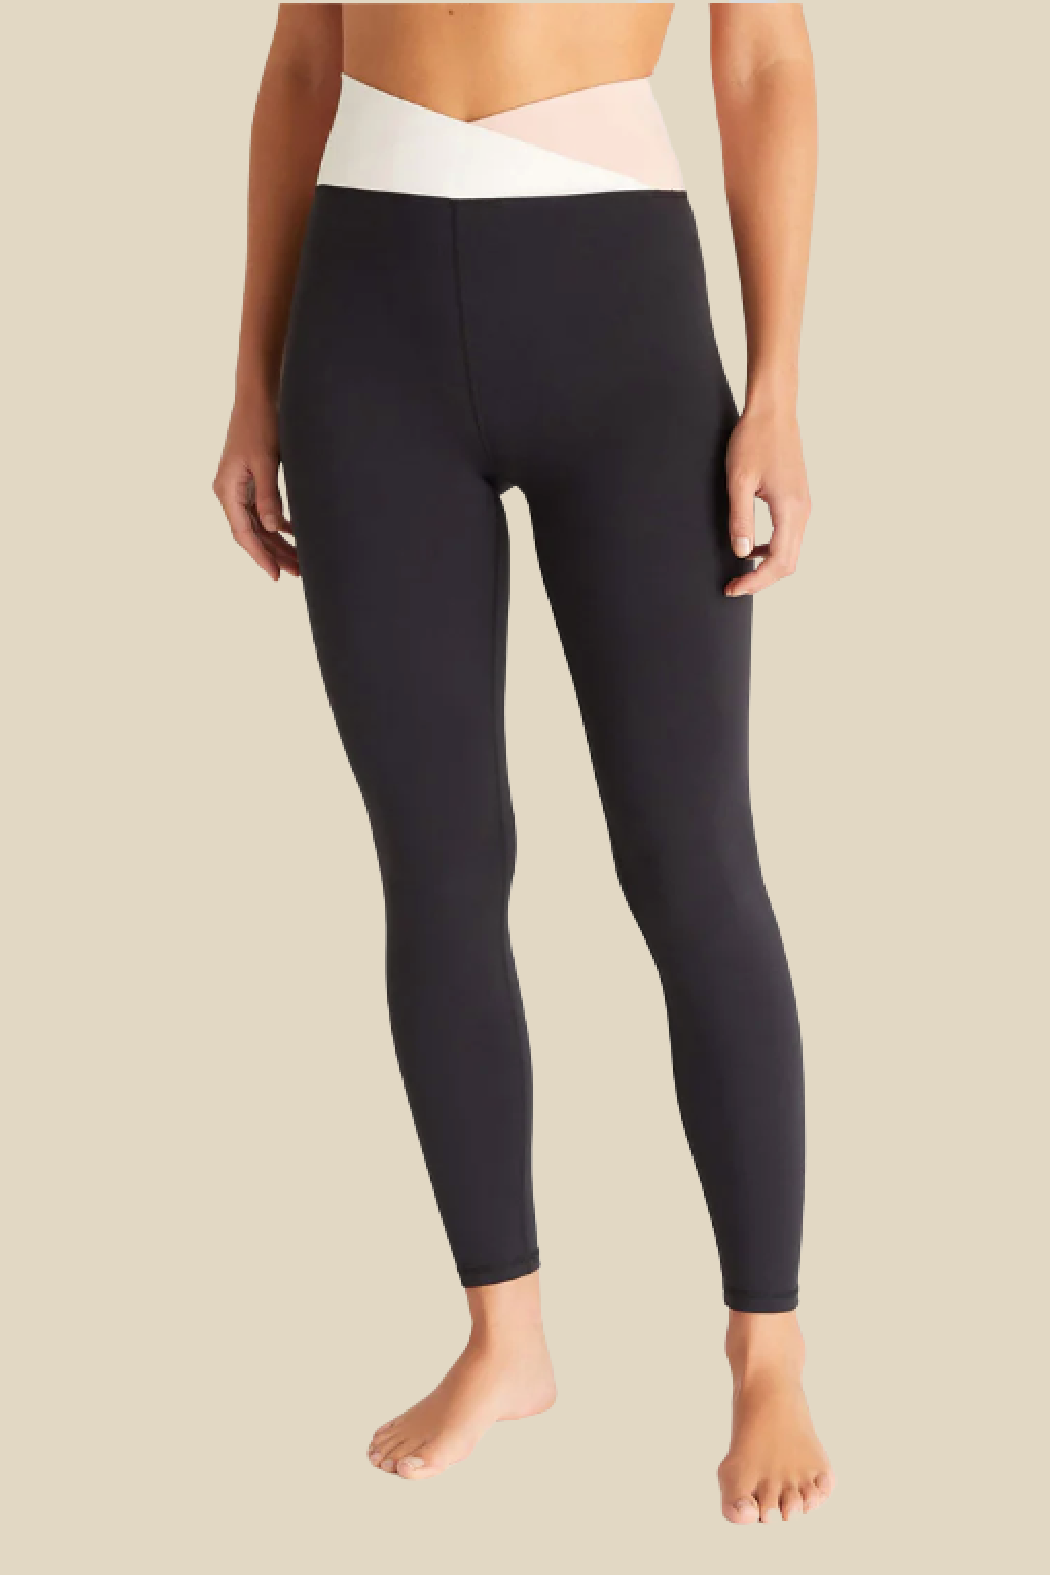 Aerie Chill Play Move Leggings